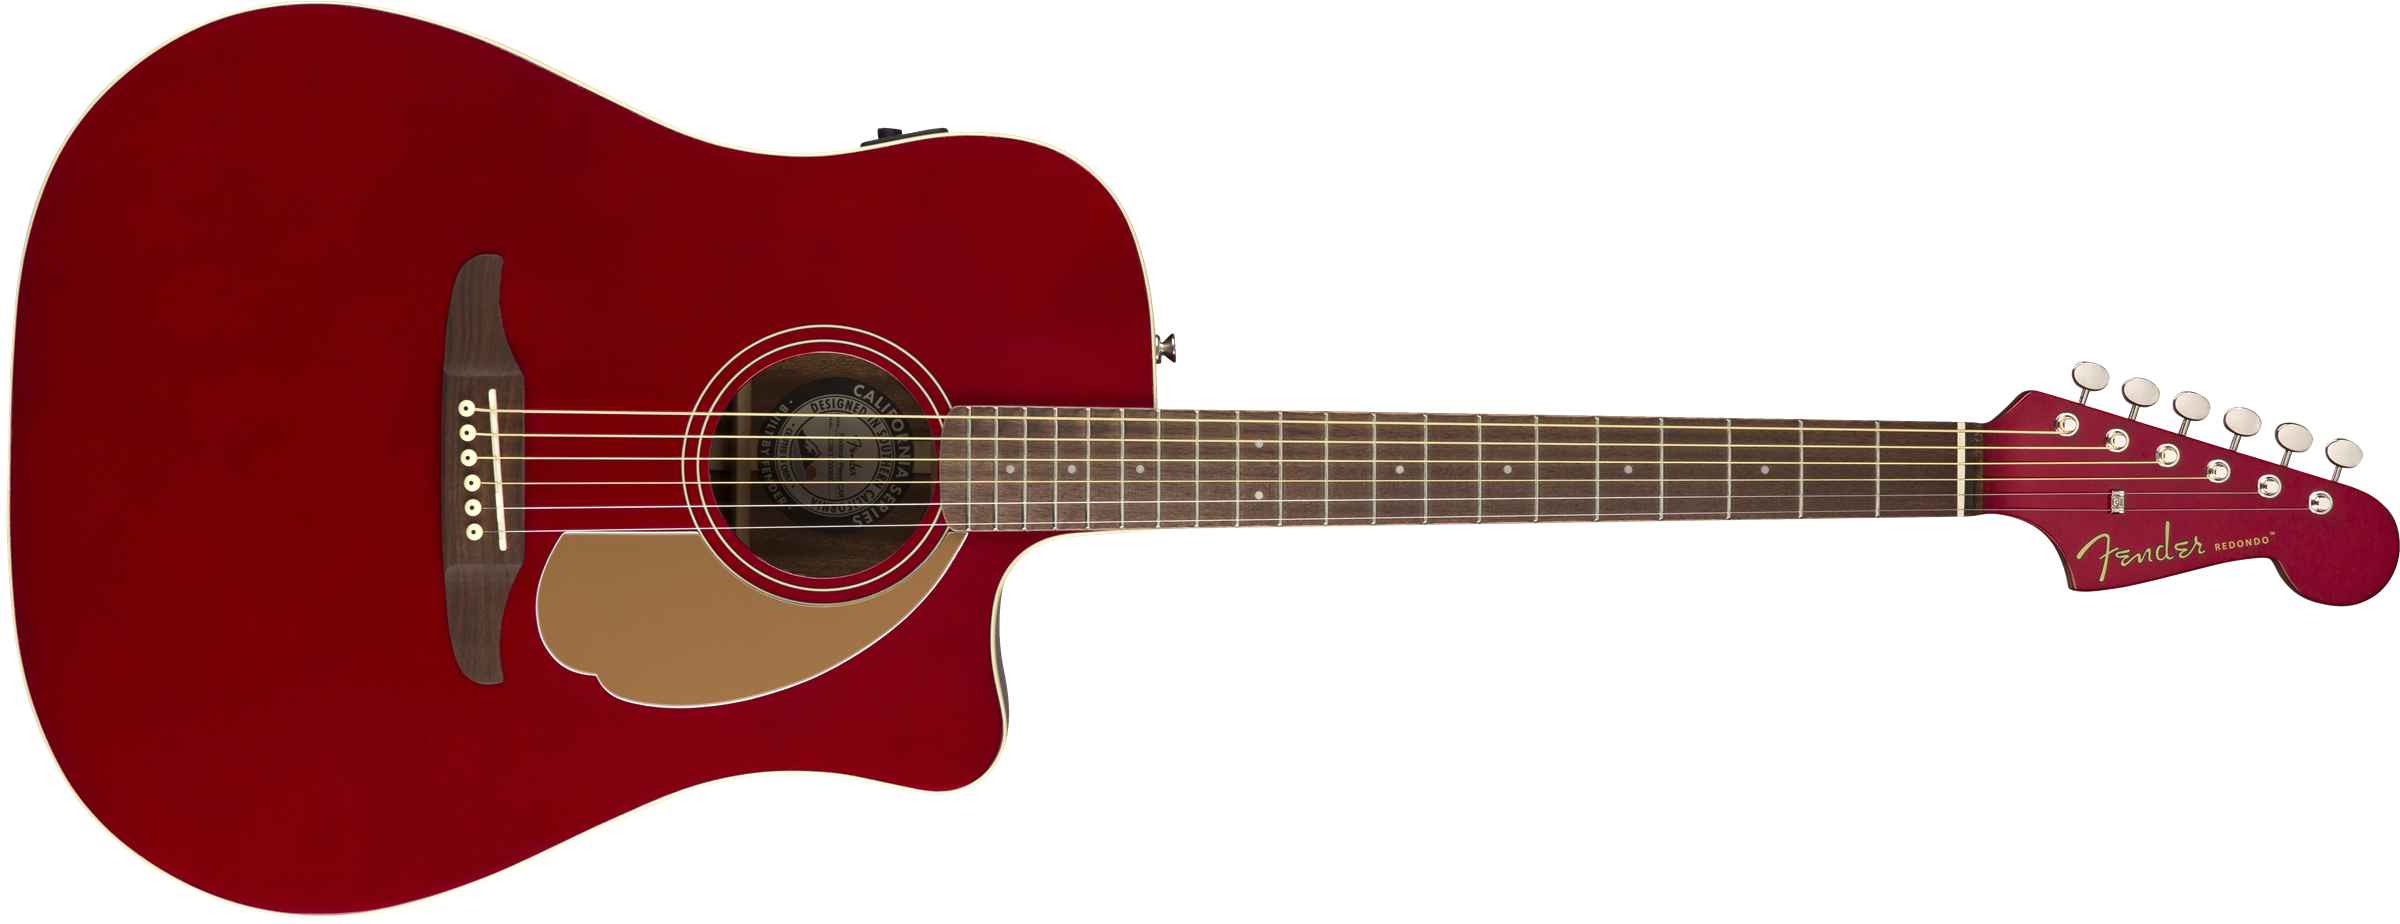 Fender Redondo Player - Candy Apple Red - Westerngitarre & electro - Variation 1